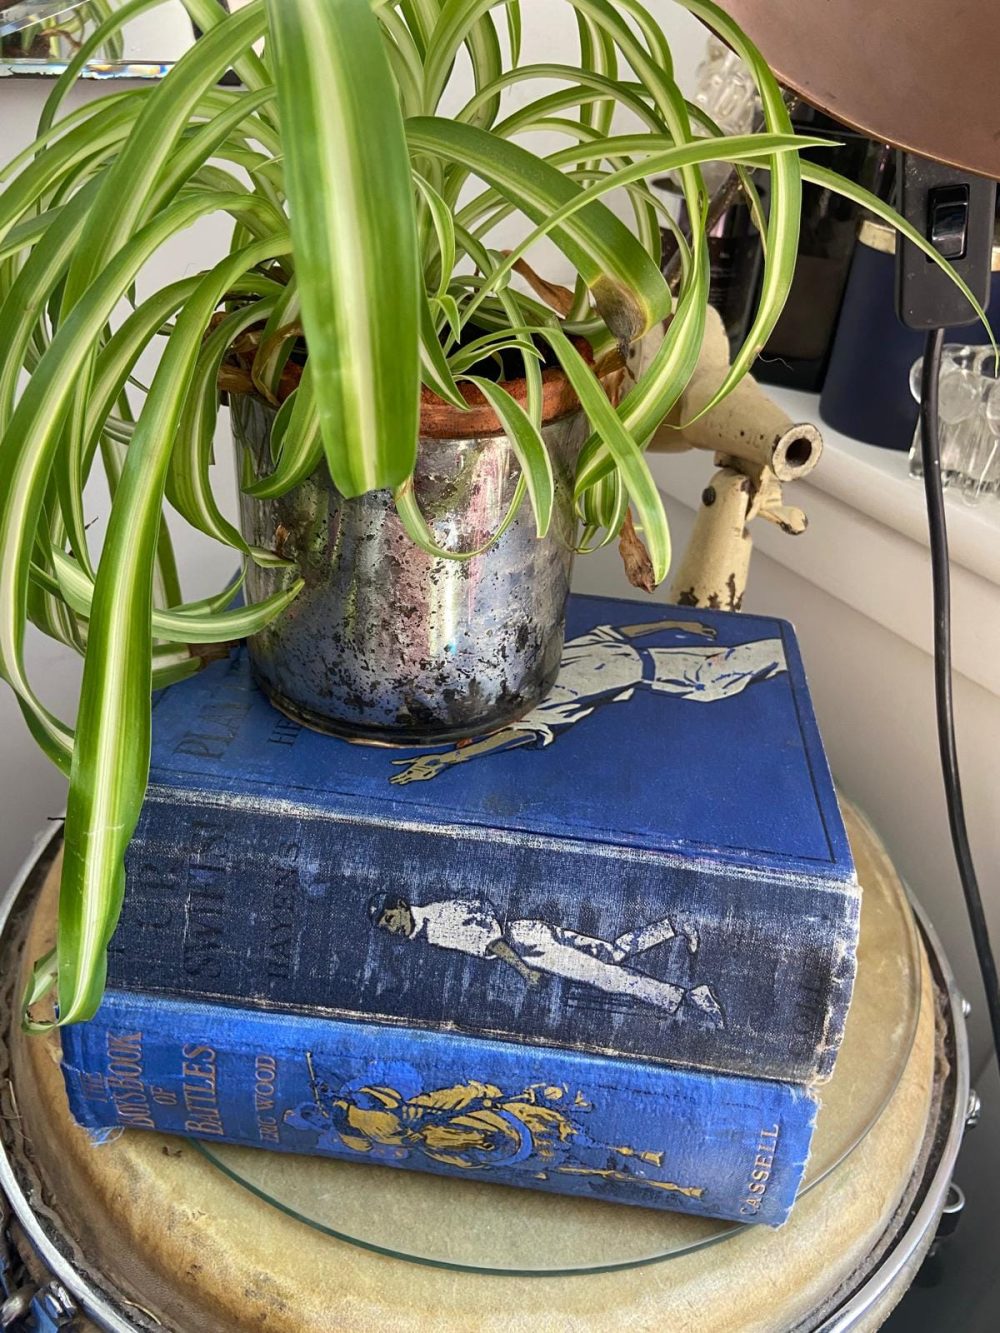 Two Blue Vintage Books in Hard-Back - For display on Coffee Table/Shelf